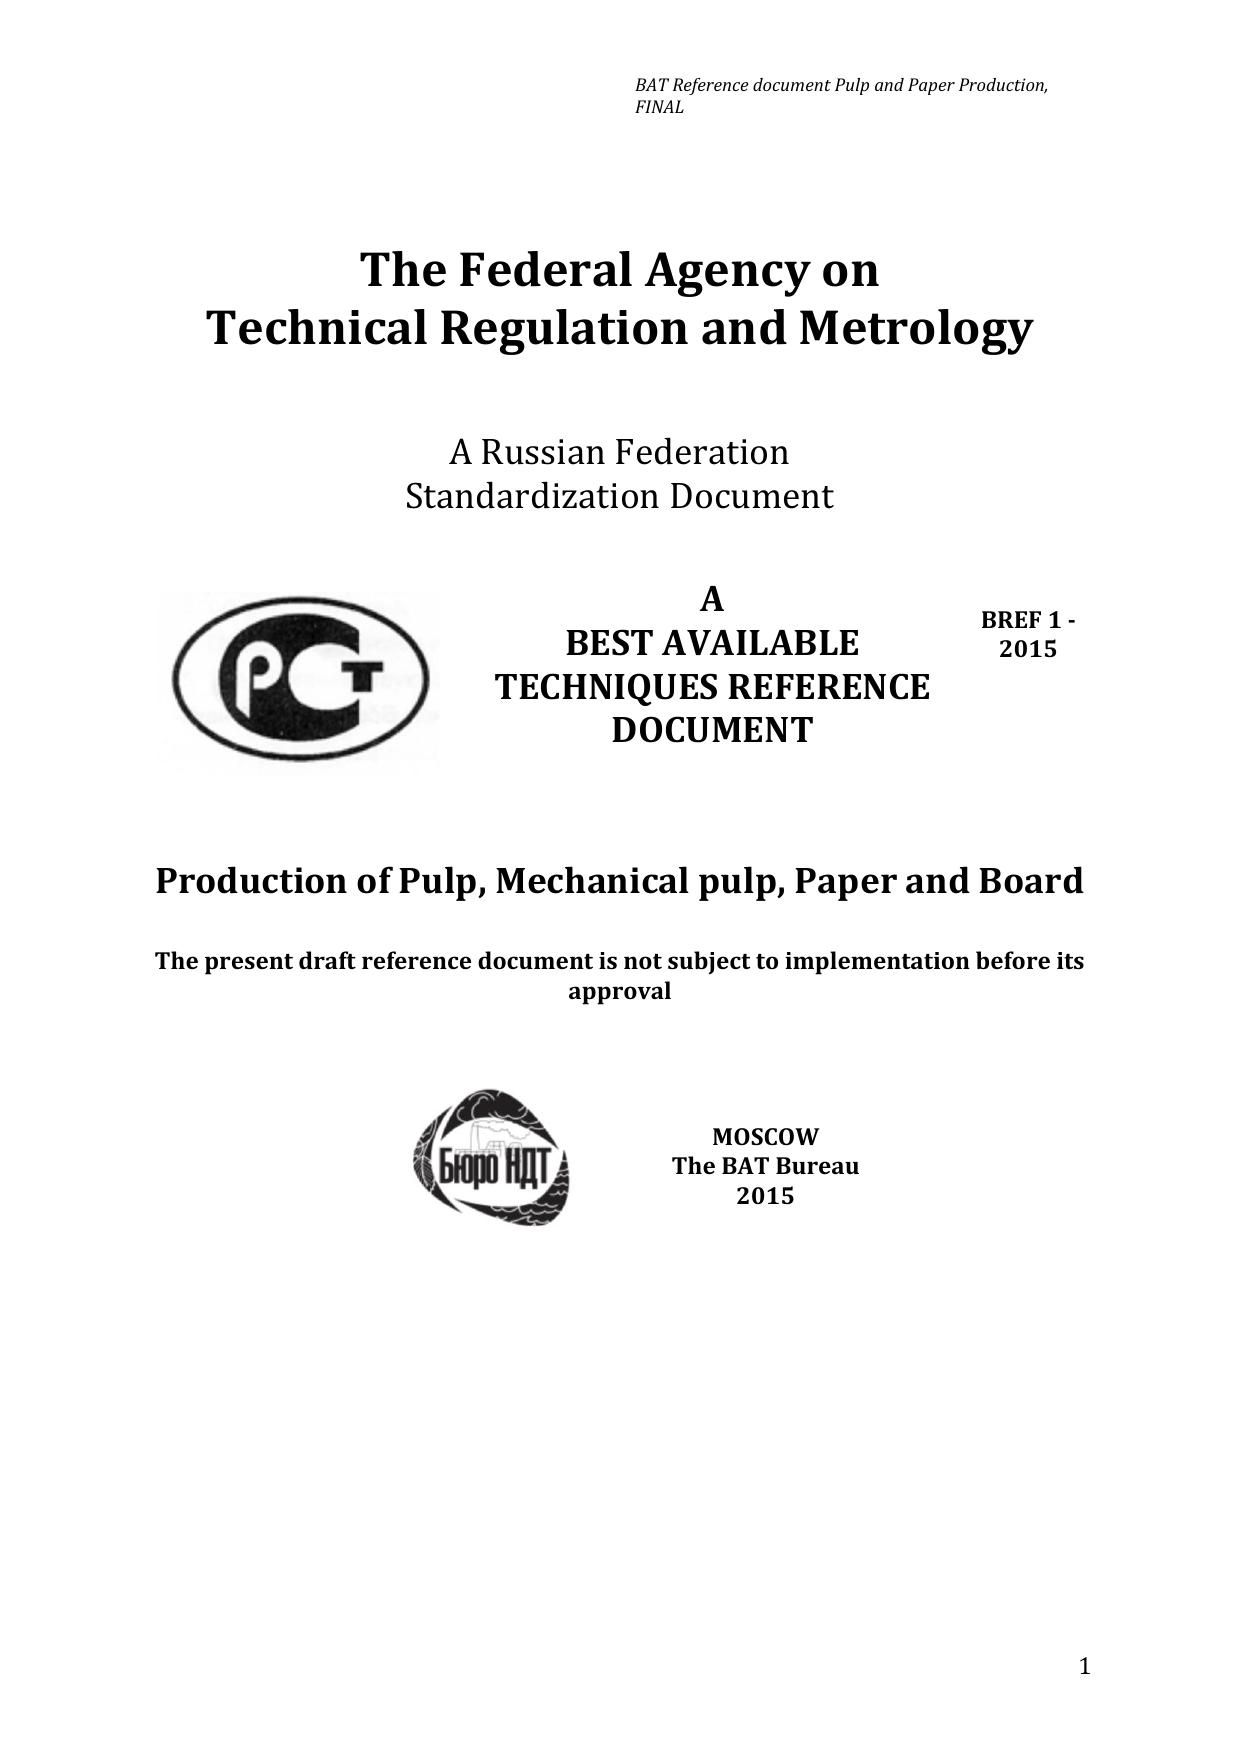 THE FEDERAL AGENCY ON TECHNICAL REGULATION AND METROLOGY    2015